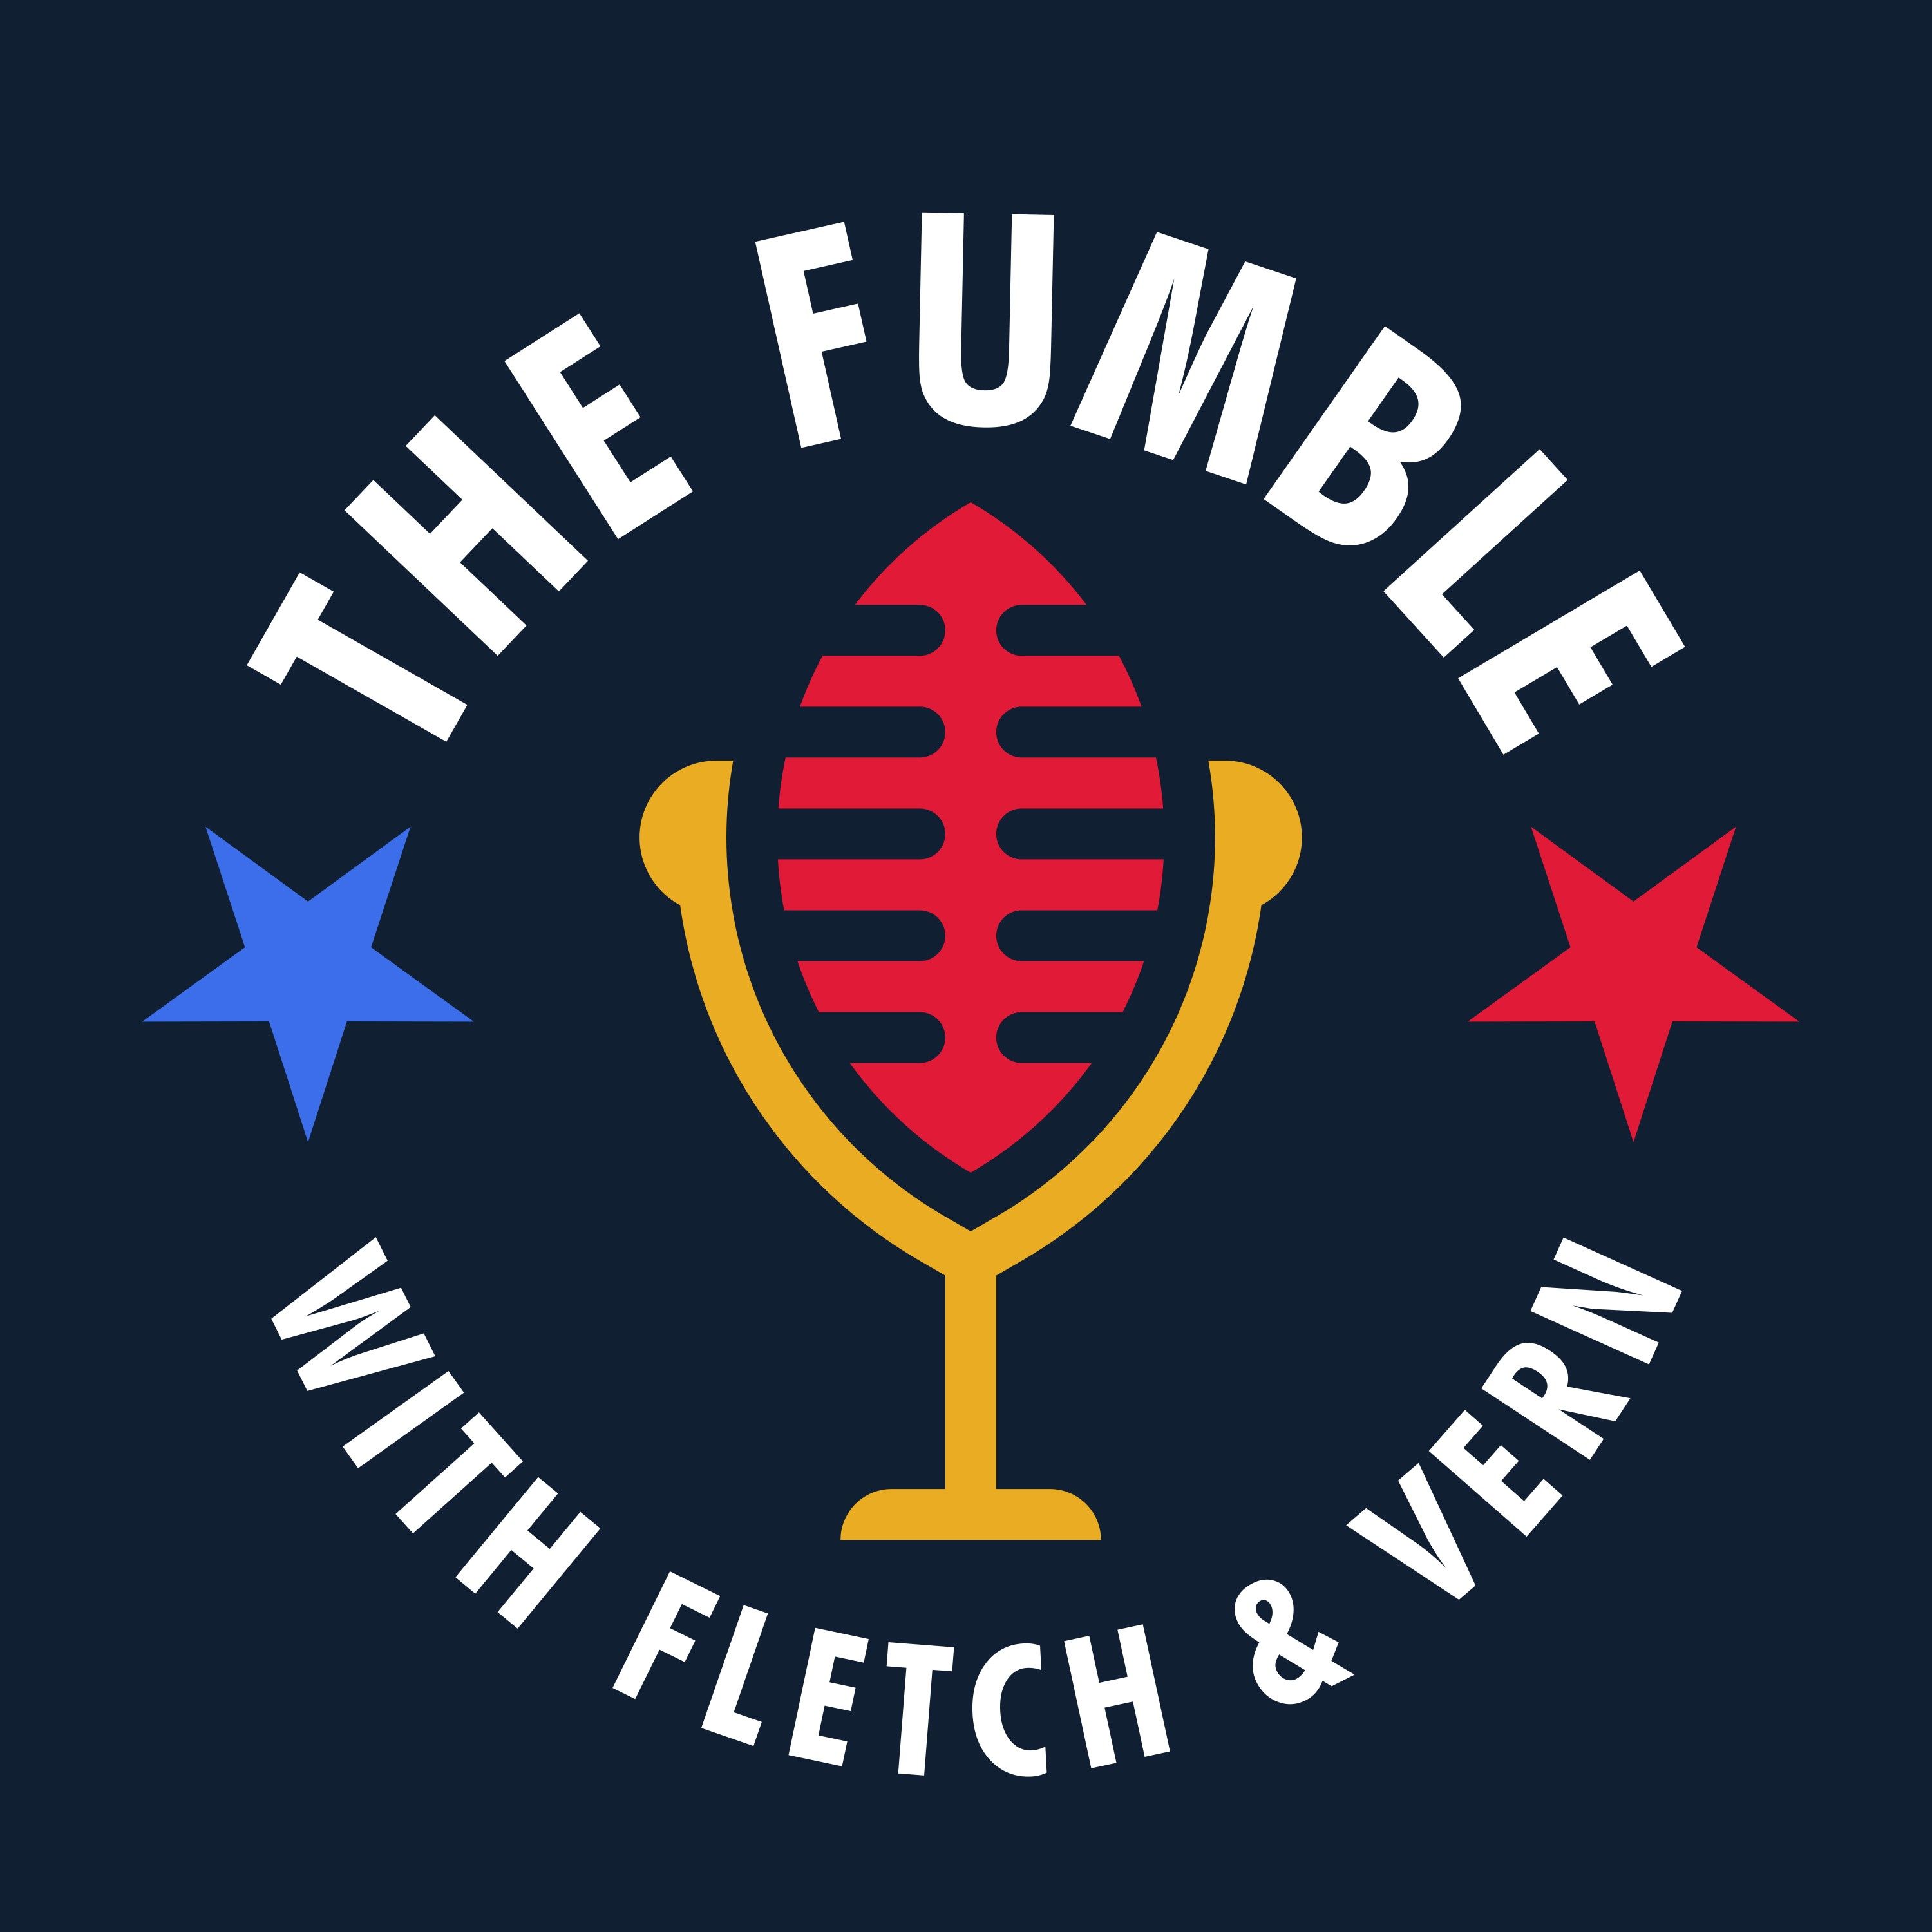 THE FUMBLE with FLETCH & VERN S4E10 MONDAY NIGHT FOOTBALL, ICE HOCKEY & THE BEST TEAM IN THE NFL